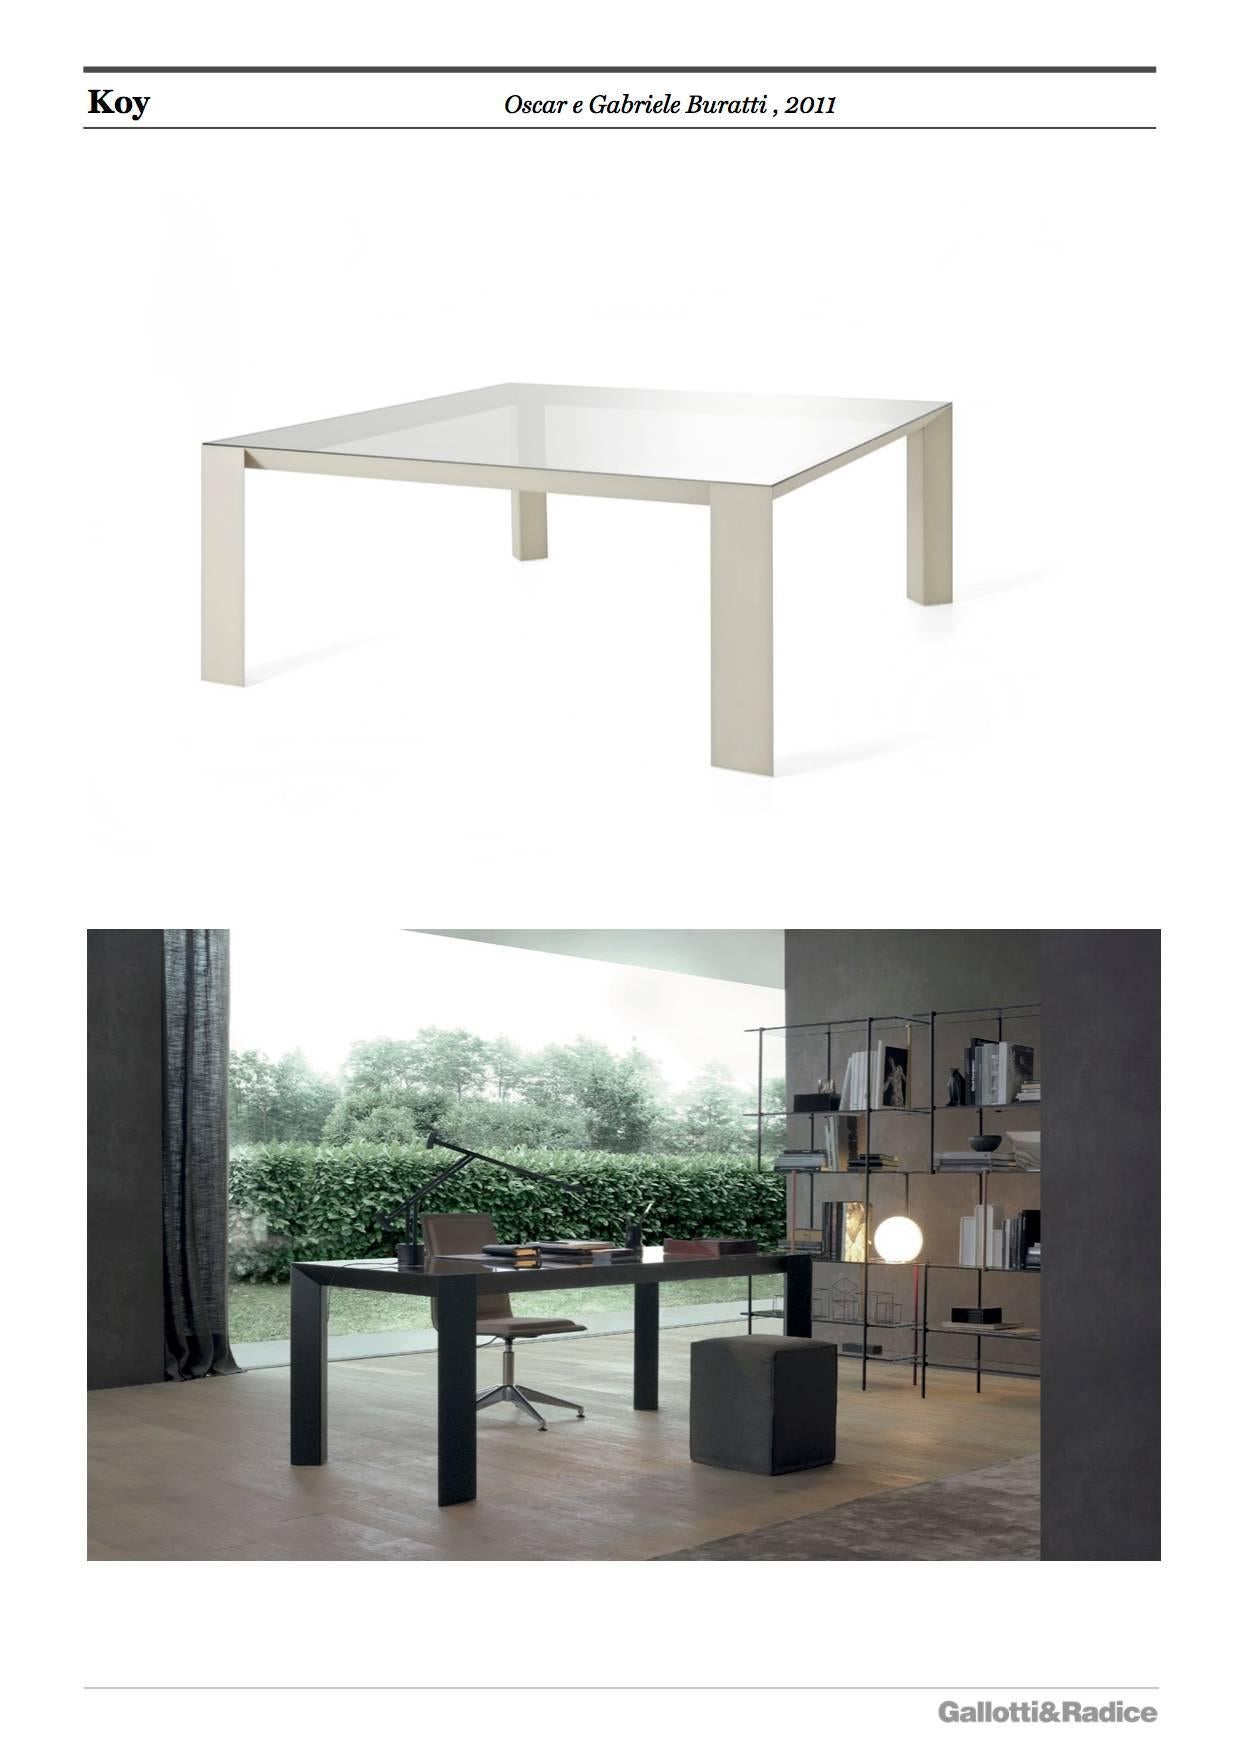 Aluminum Gallotti an Radice Koy Table in Wood or Lacquered Base with Glass Top For Sale